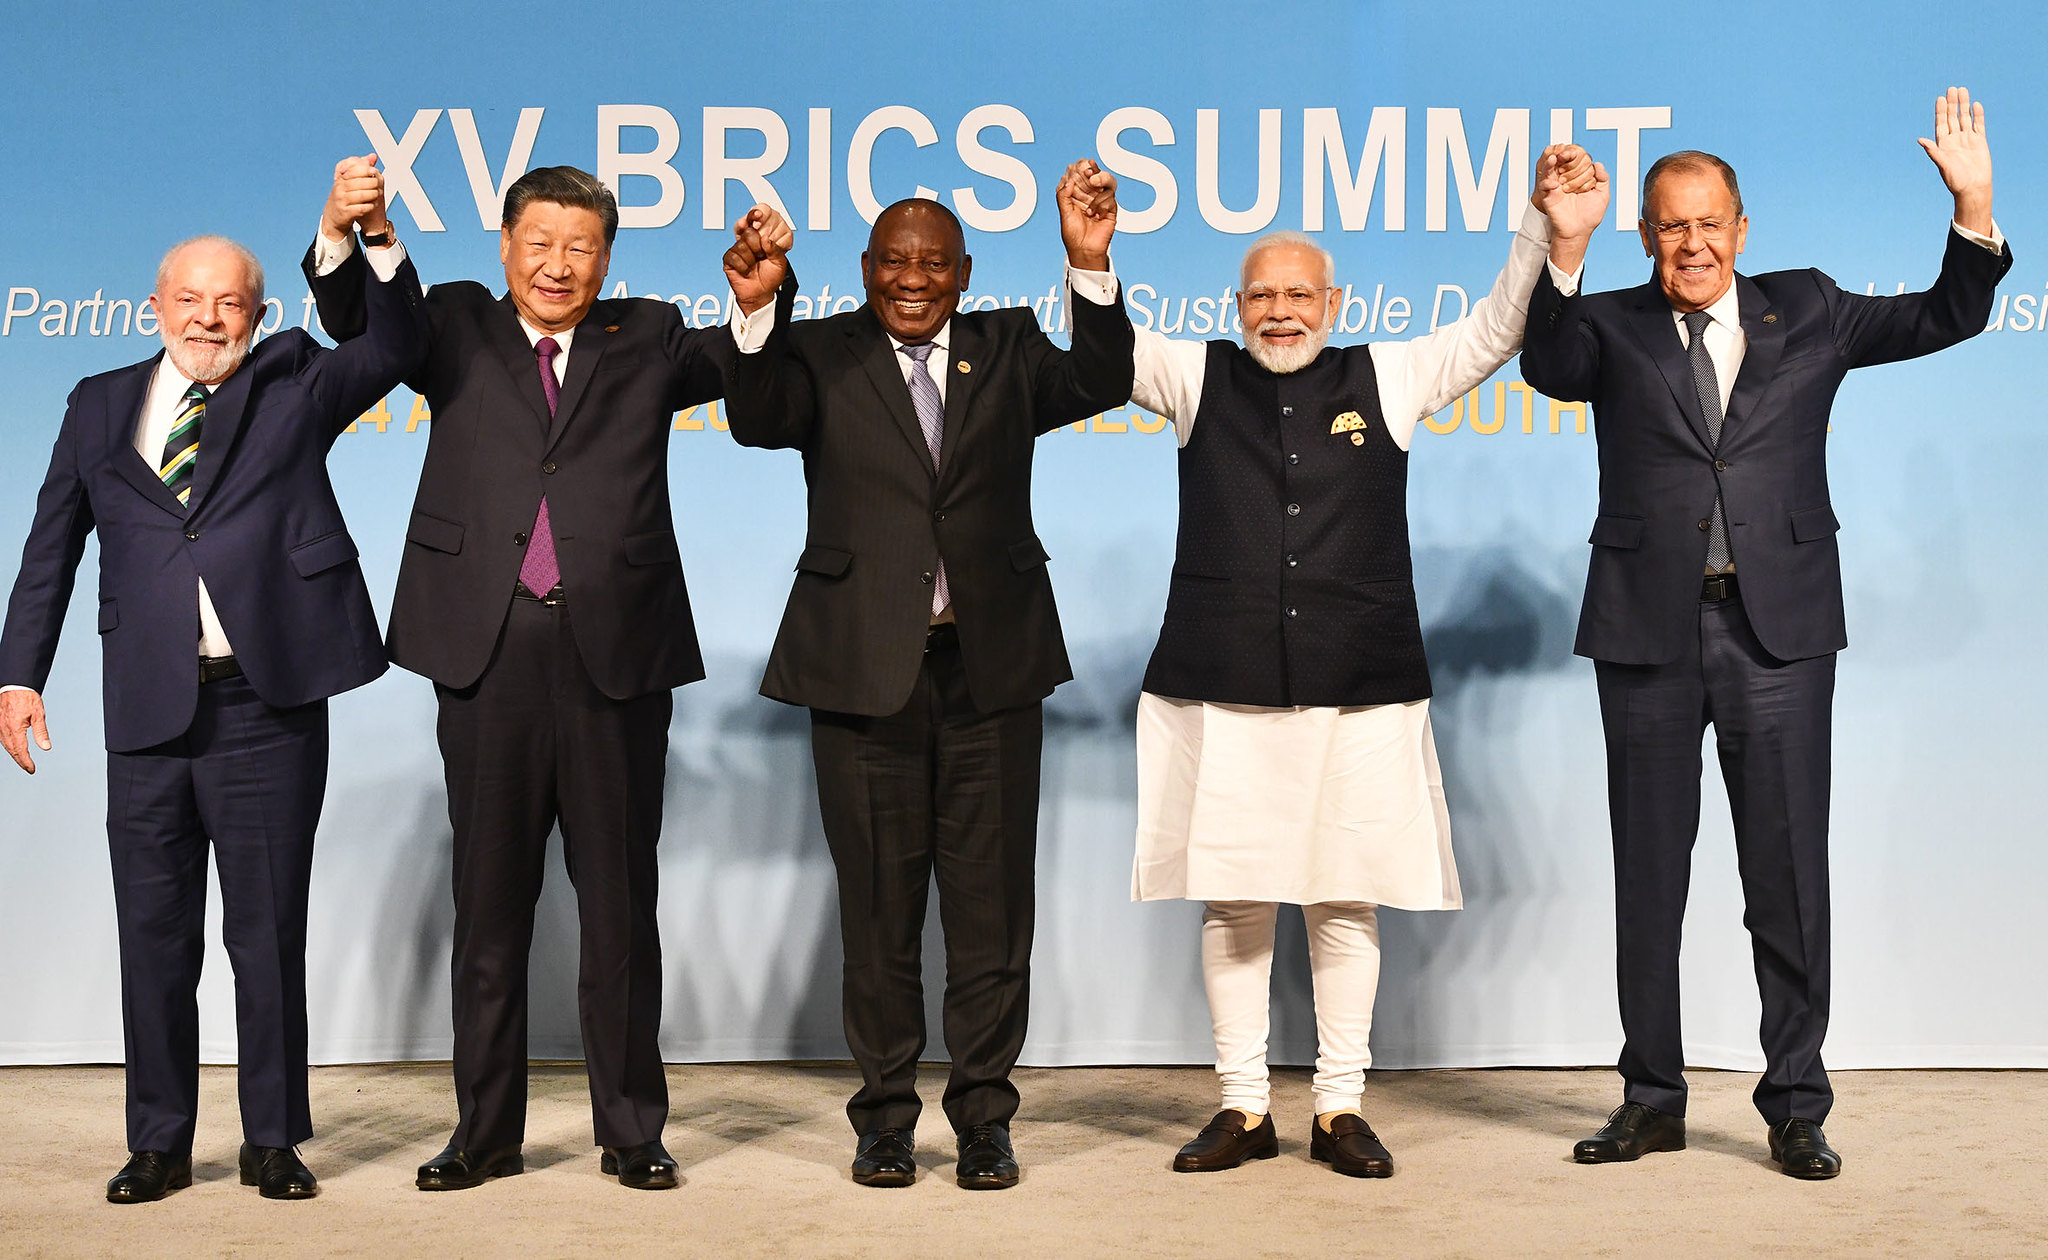 The BRICS are back, but for what purpose? Friends of Europe